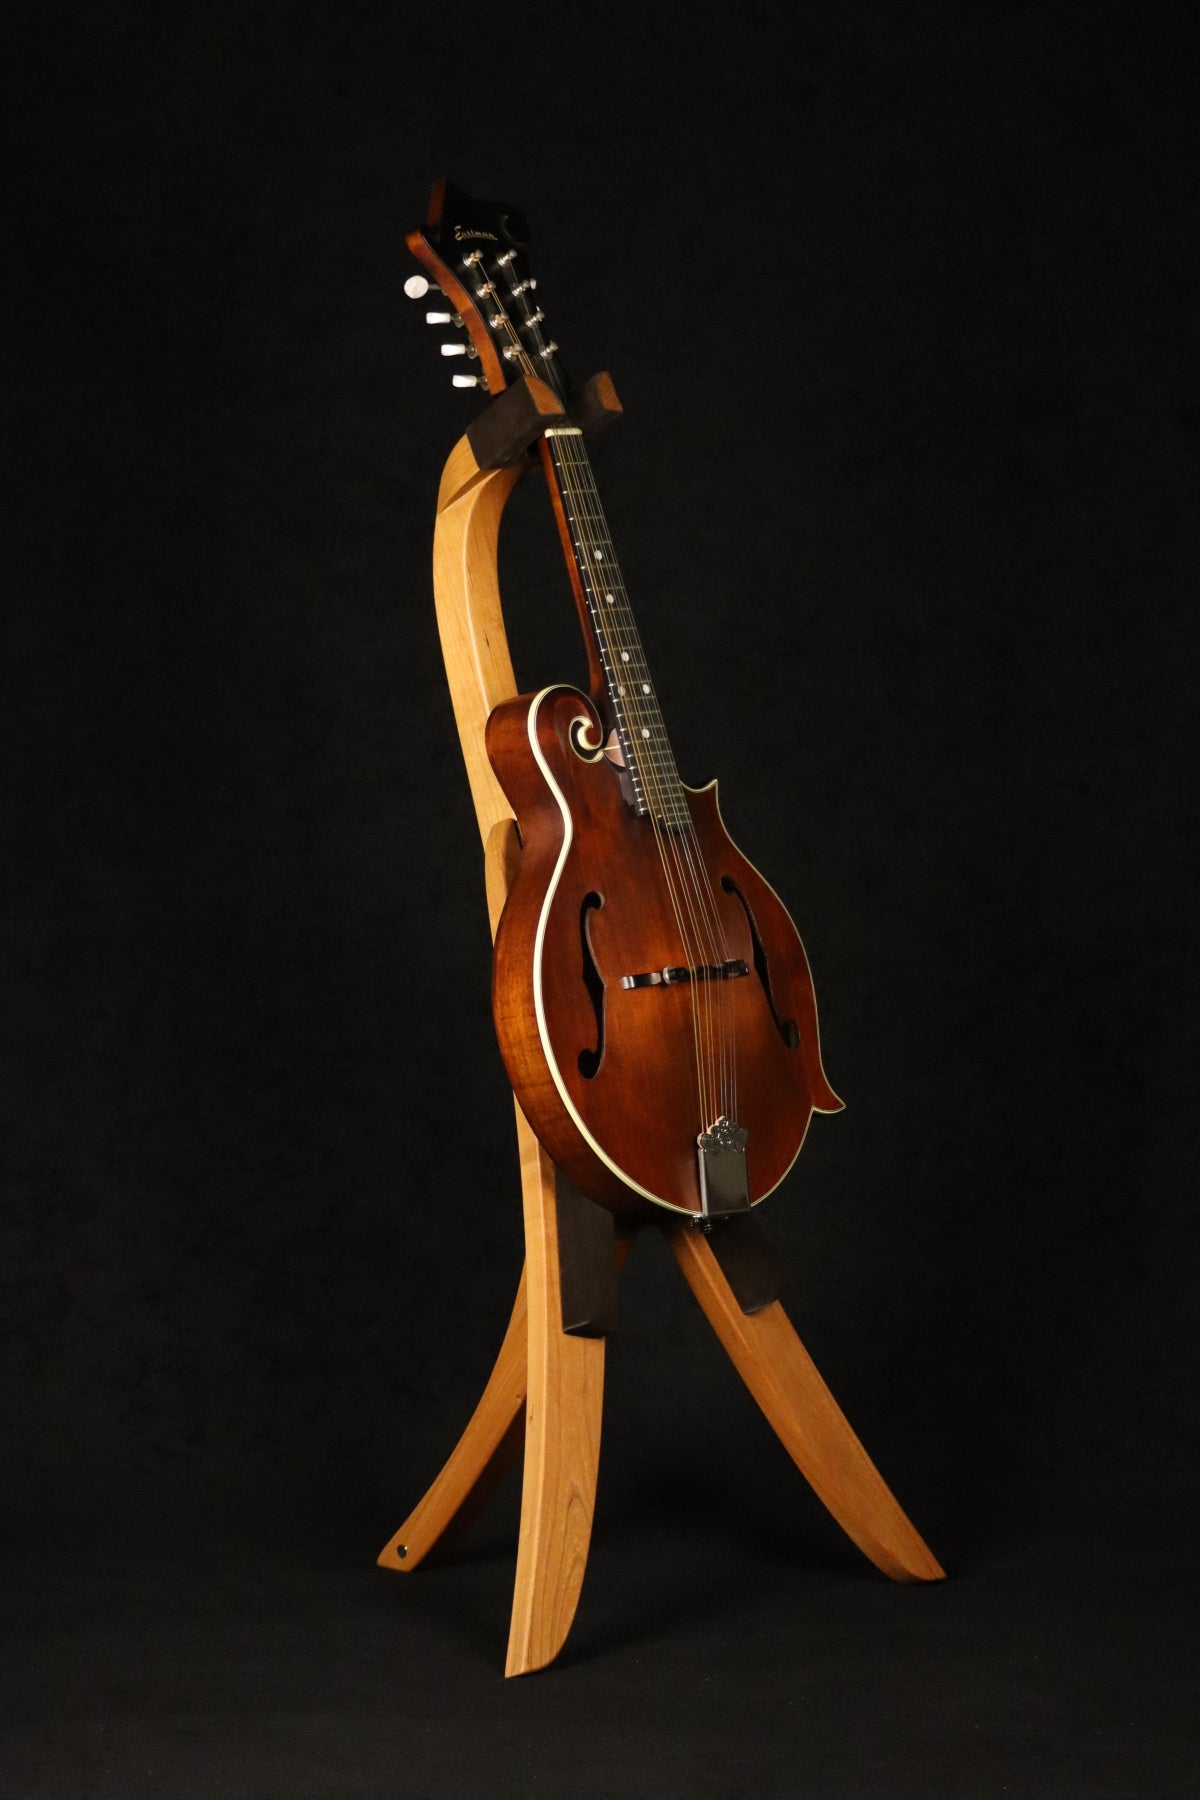 Folding cherry wood mandolin floor stand full front image with Eastman mandolin